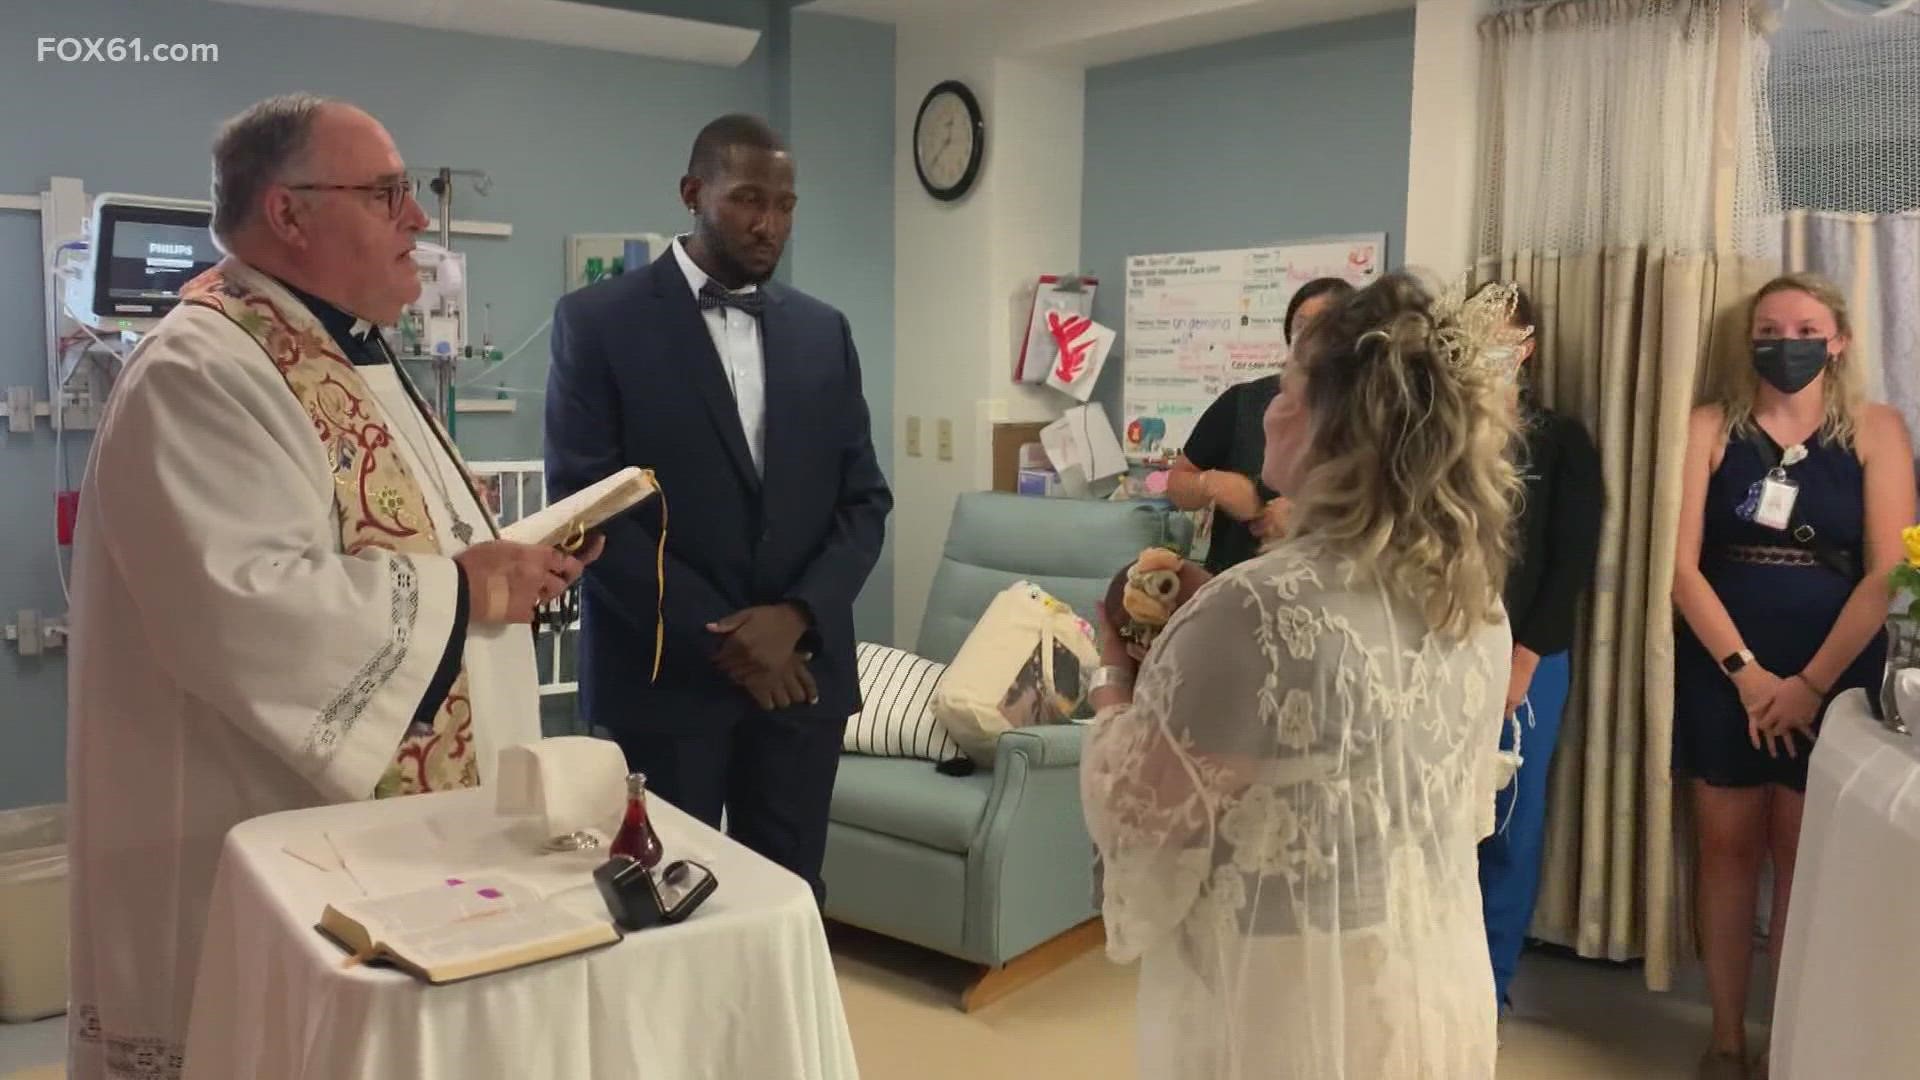 Their baby was born at 28 weeks, the couple got married at the hospital where their baby was born.